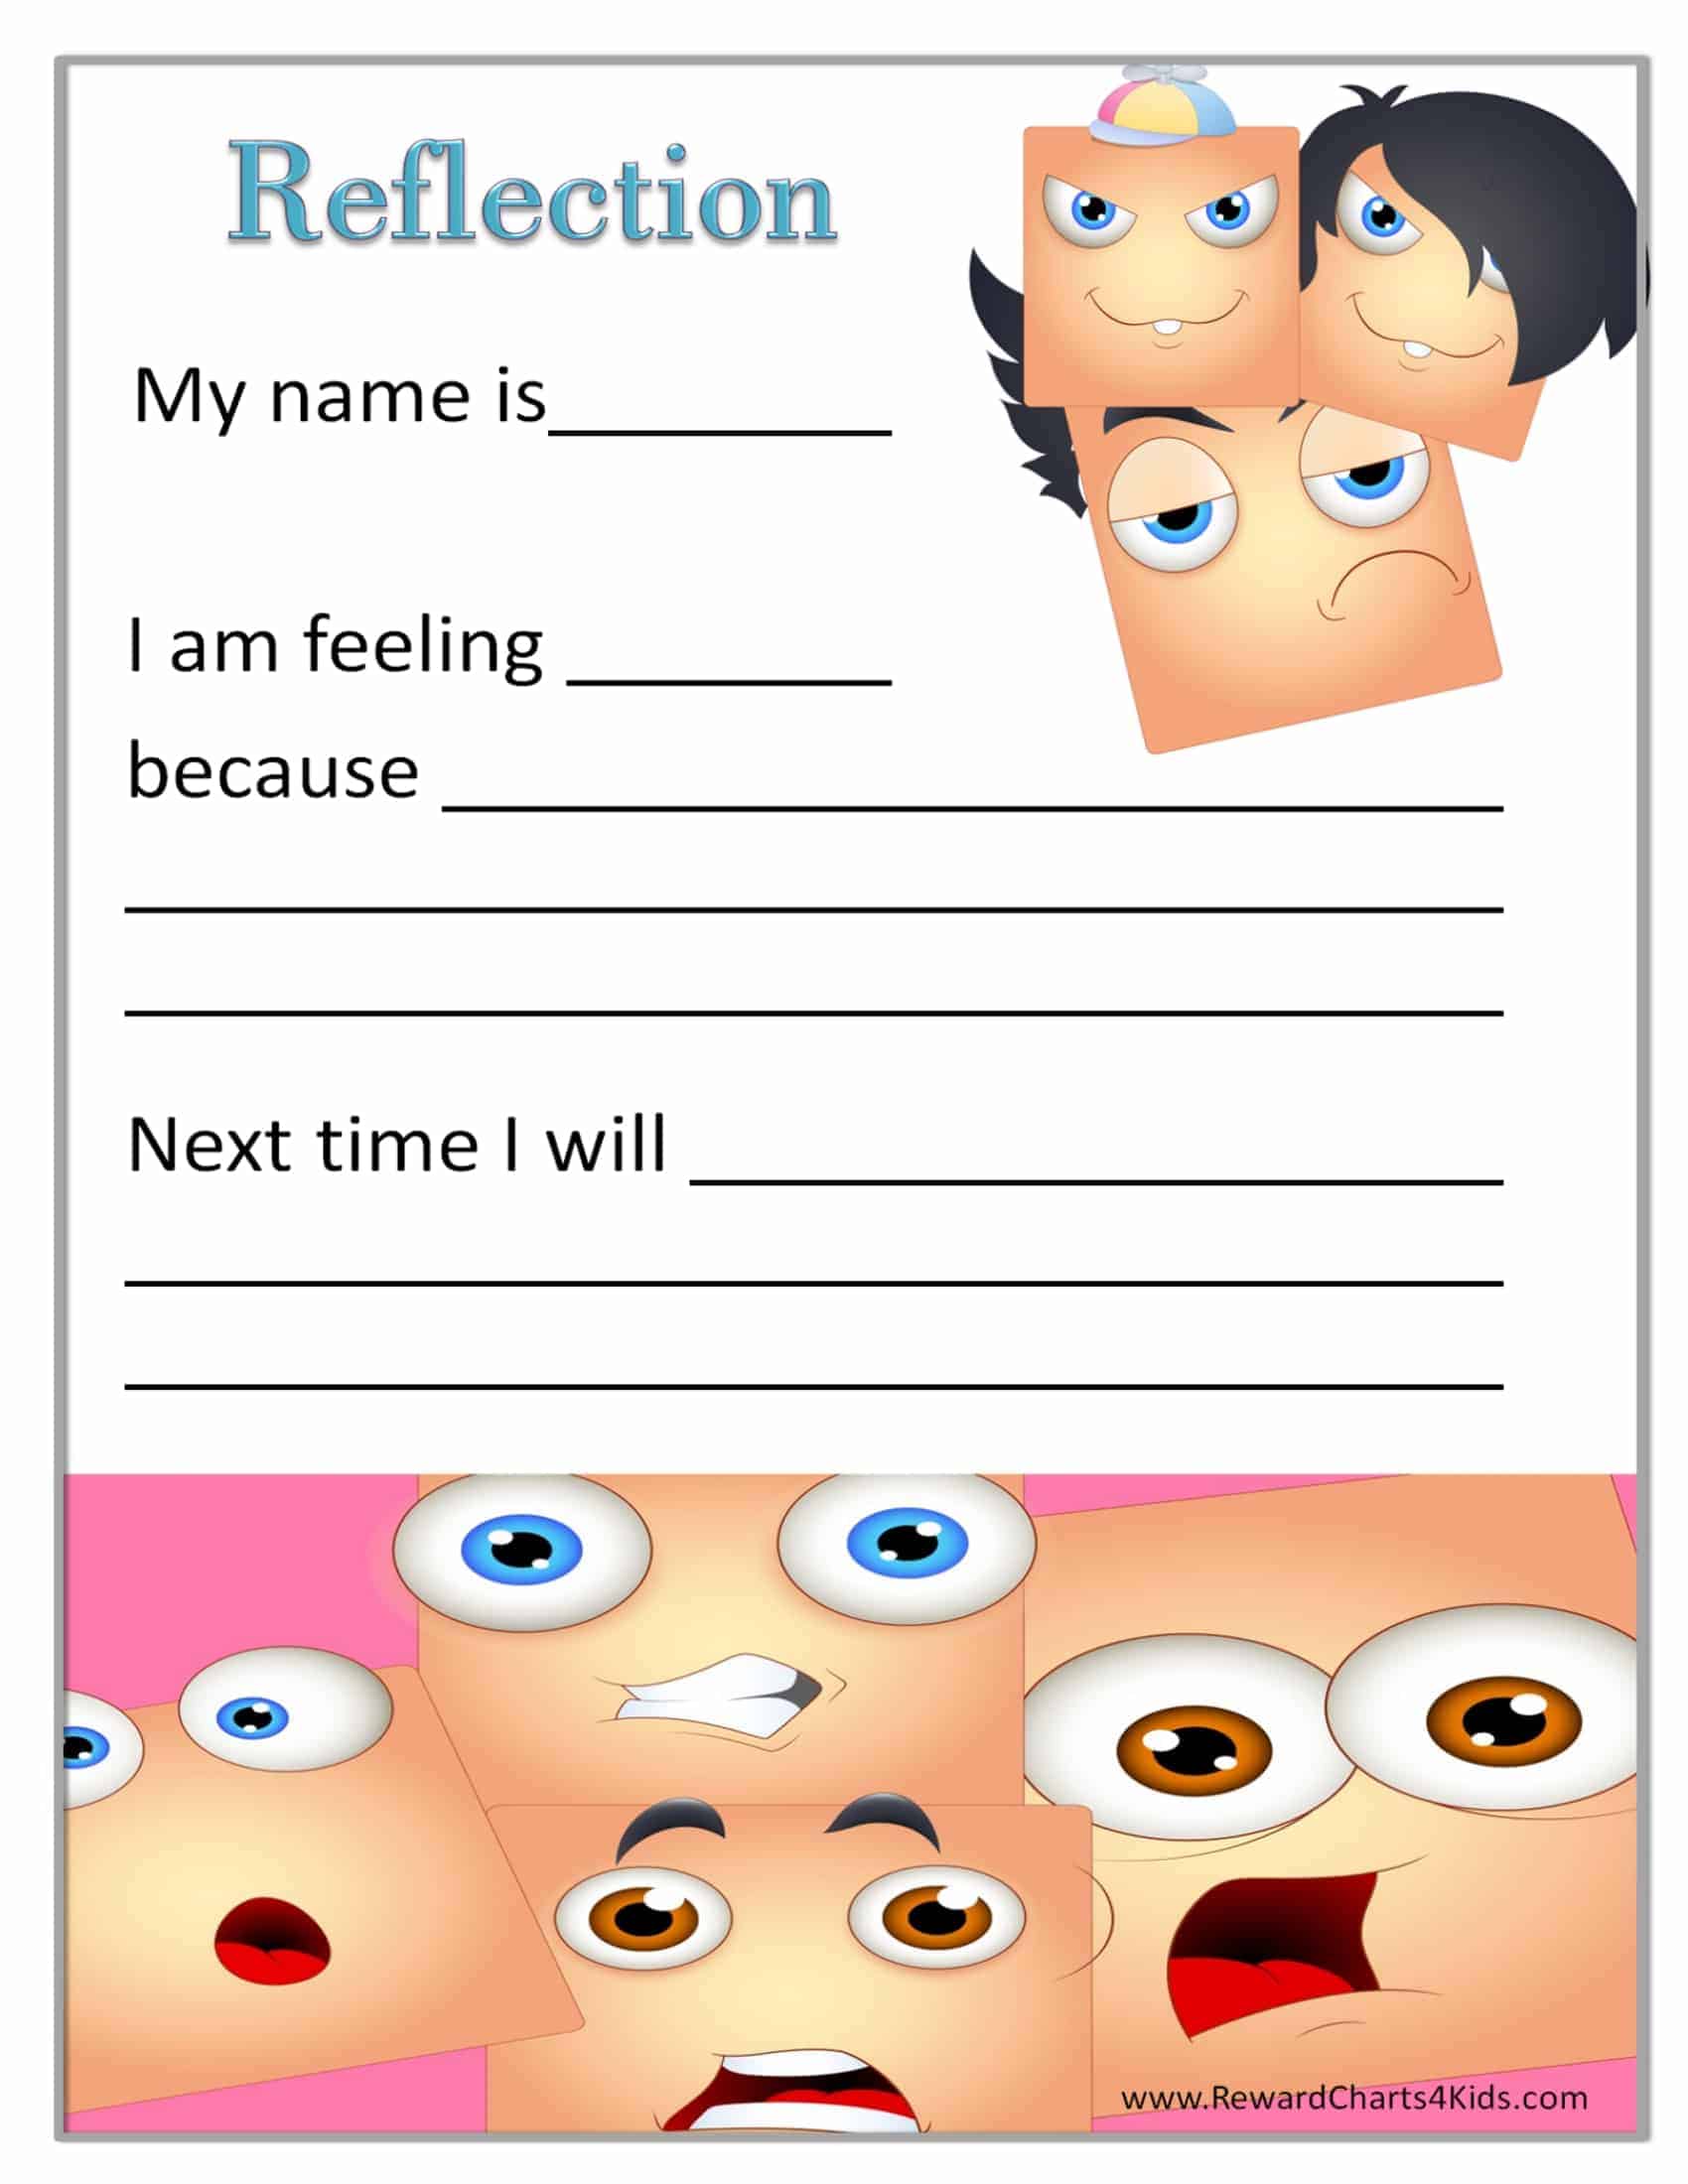 Printable Mood Chart With Faces